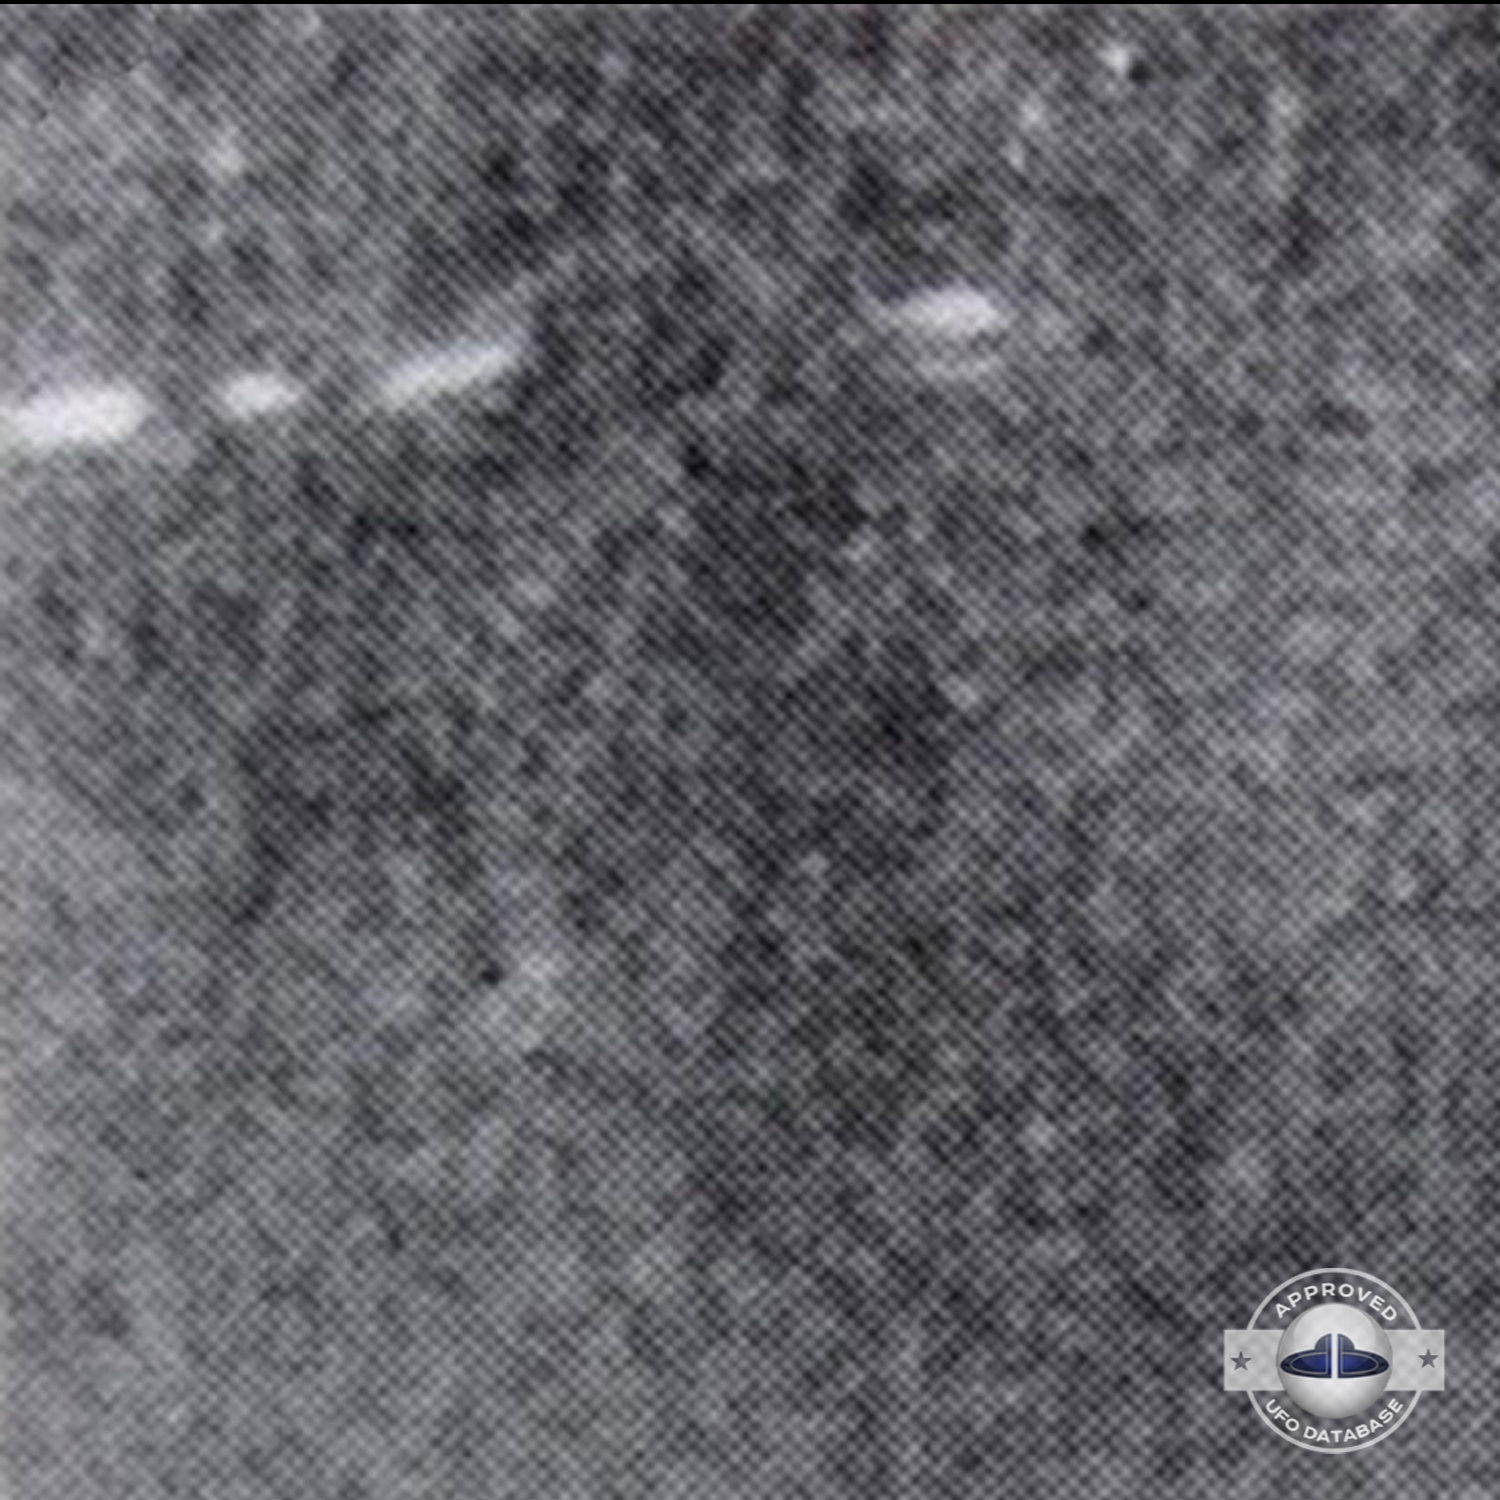 Several UFOs near Japanese Kawasaki fighters over the Devil